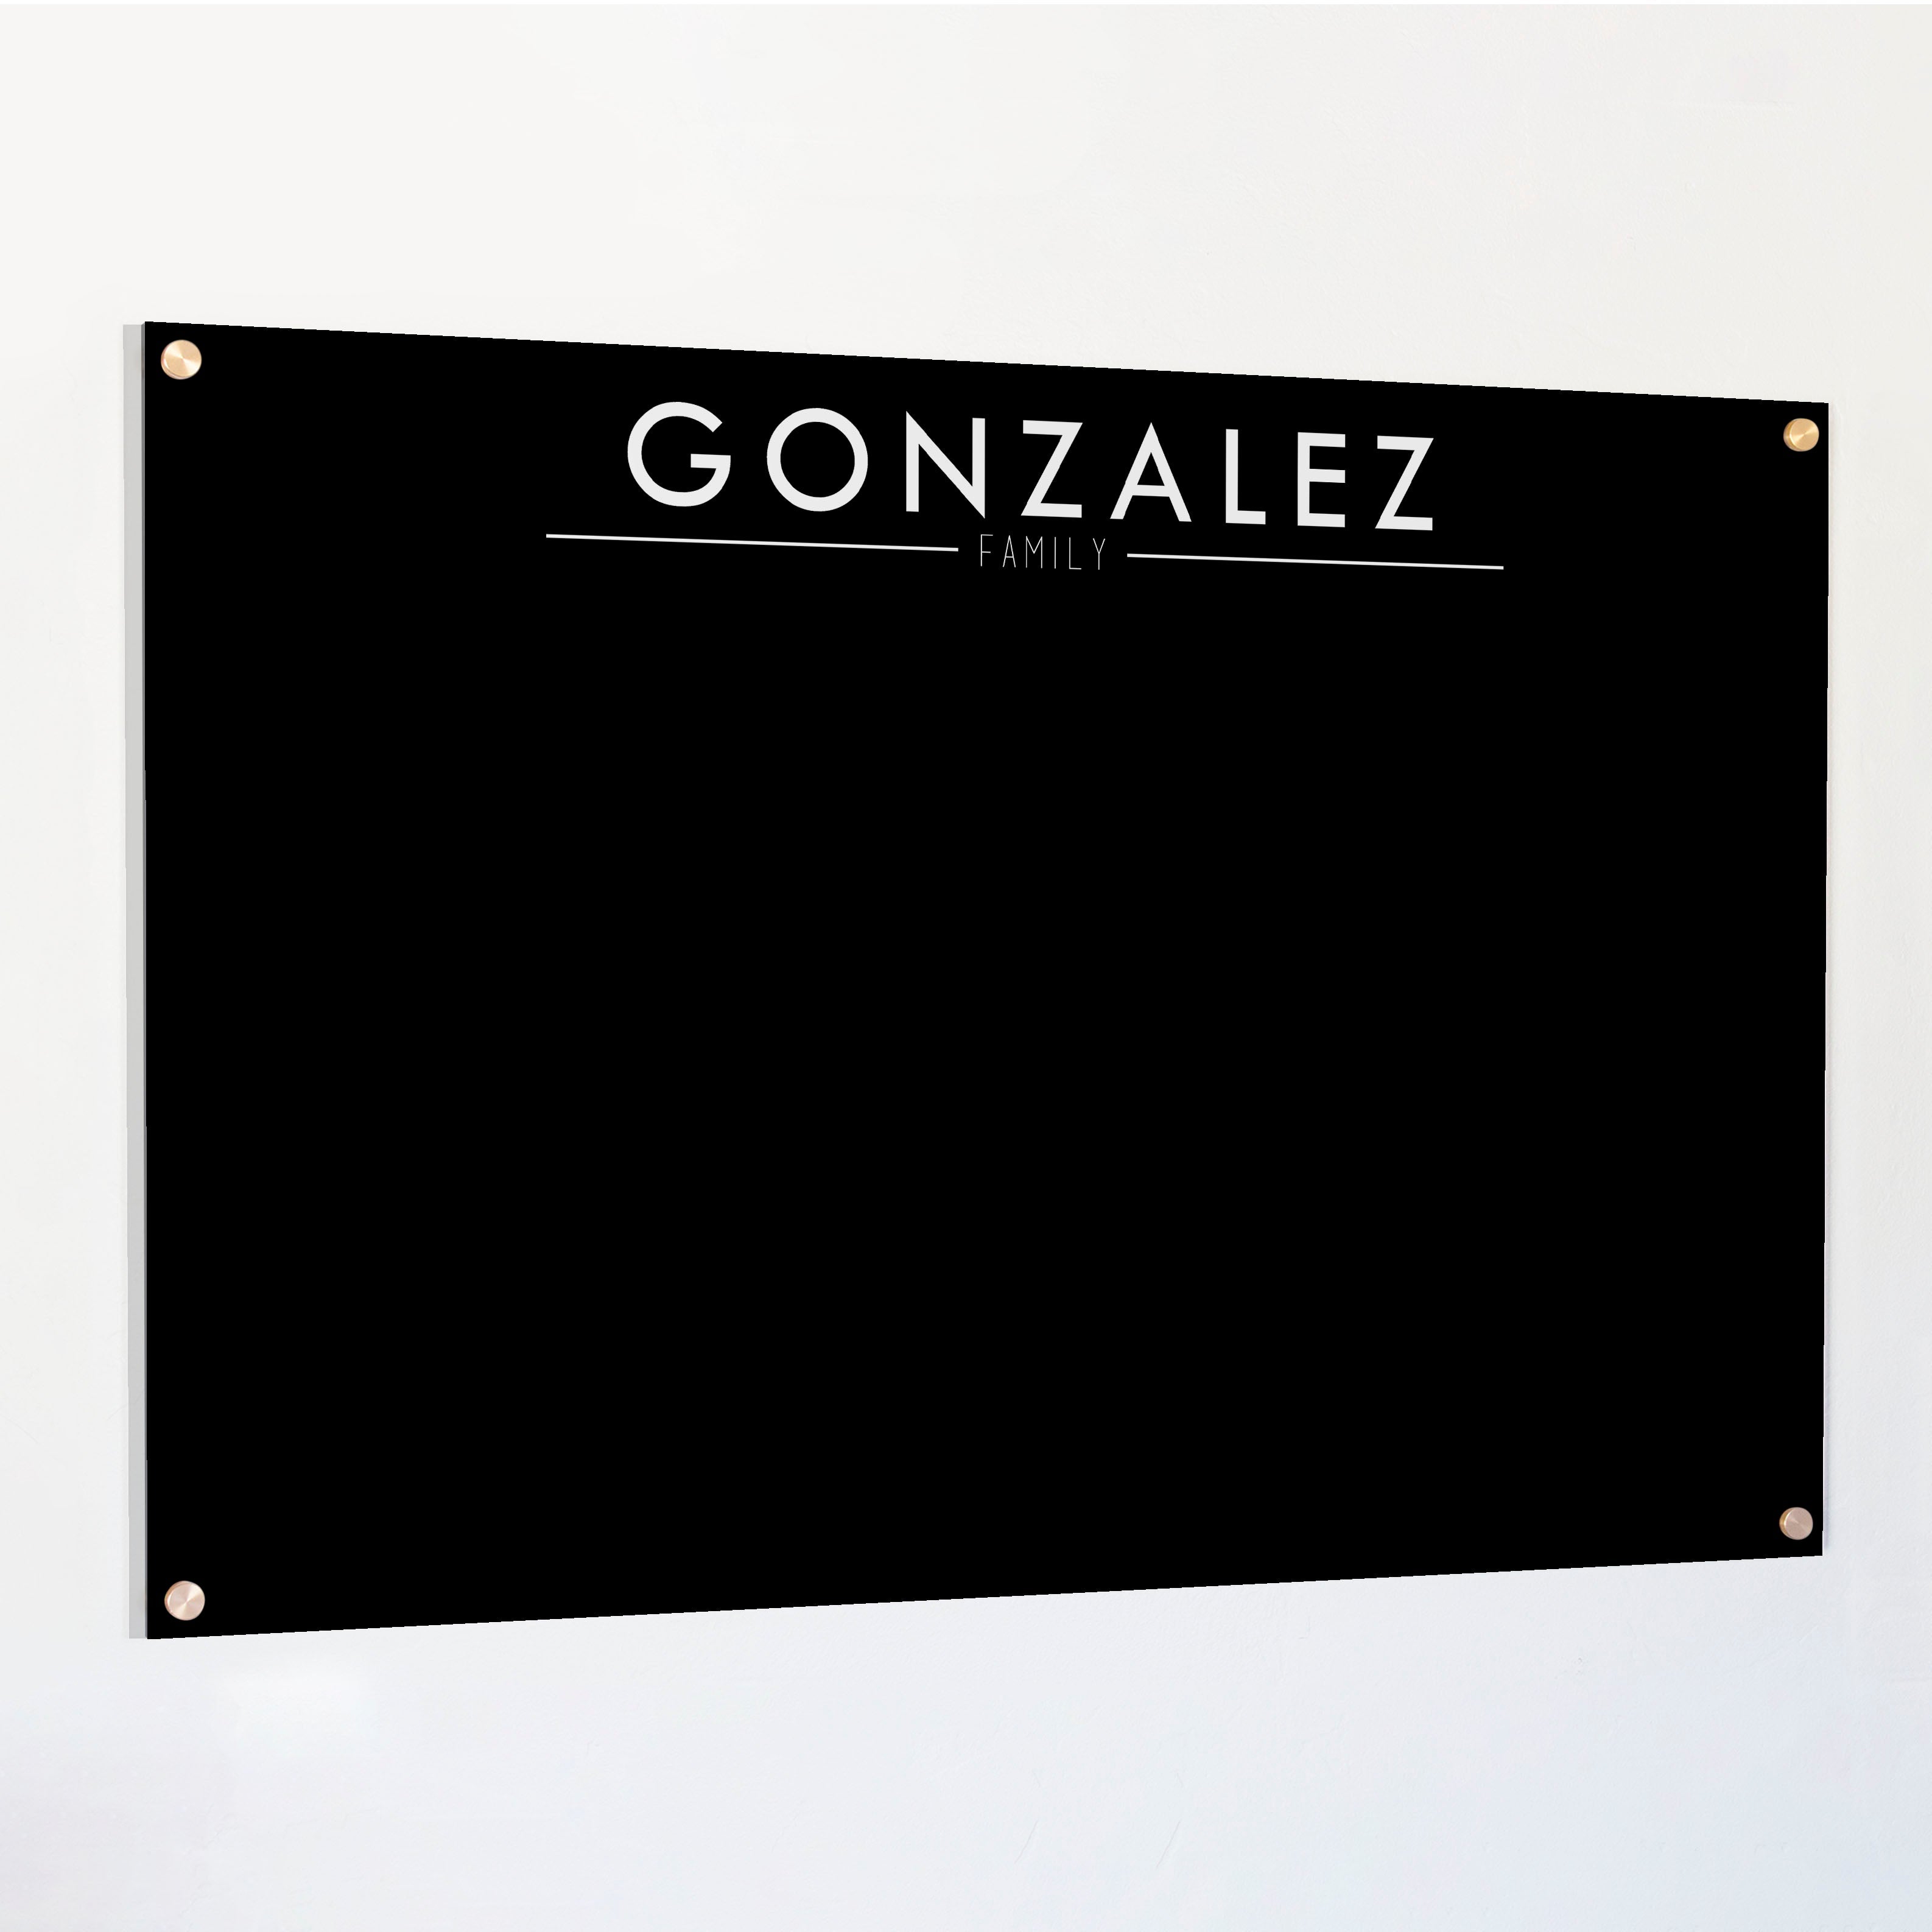 A dry-erase board made of black acrylic with a custom title up top